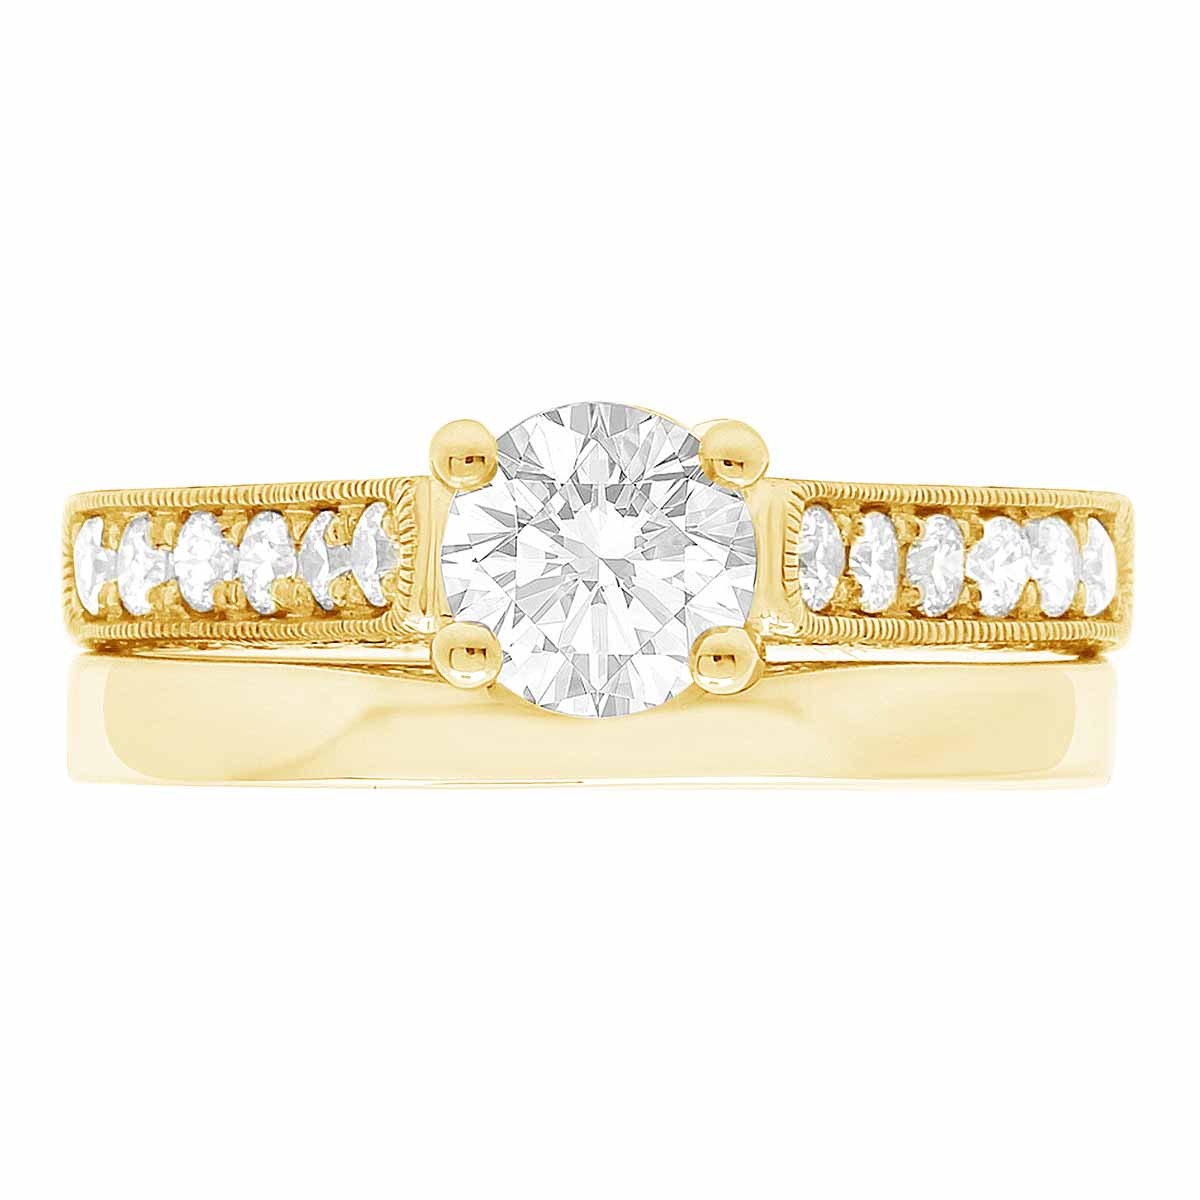 Diamond Encrusted Engagement Ring made in yellow gold with a matching plain wedding ring